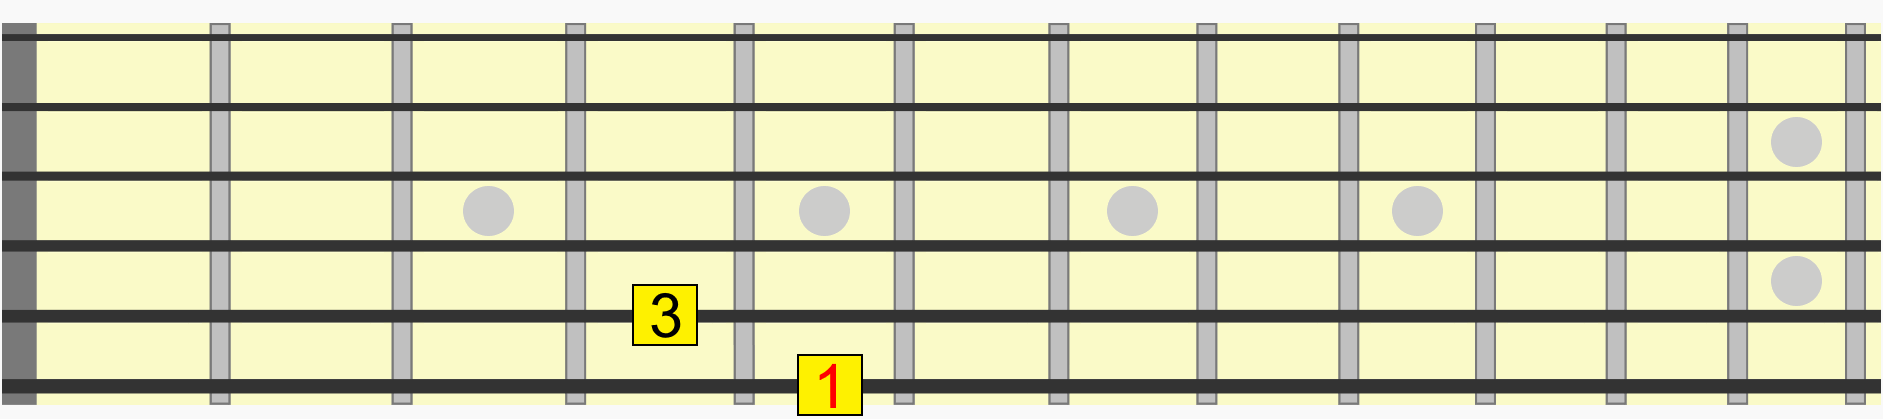 major 3rd interval in various places on the guitar neck